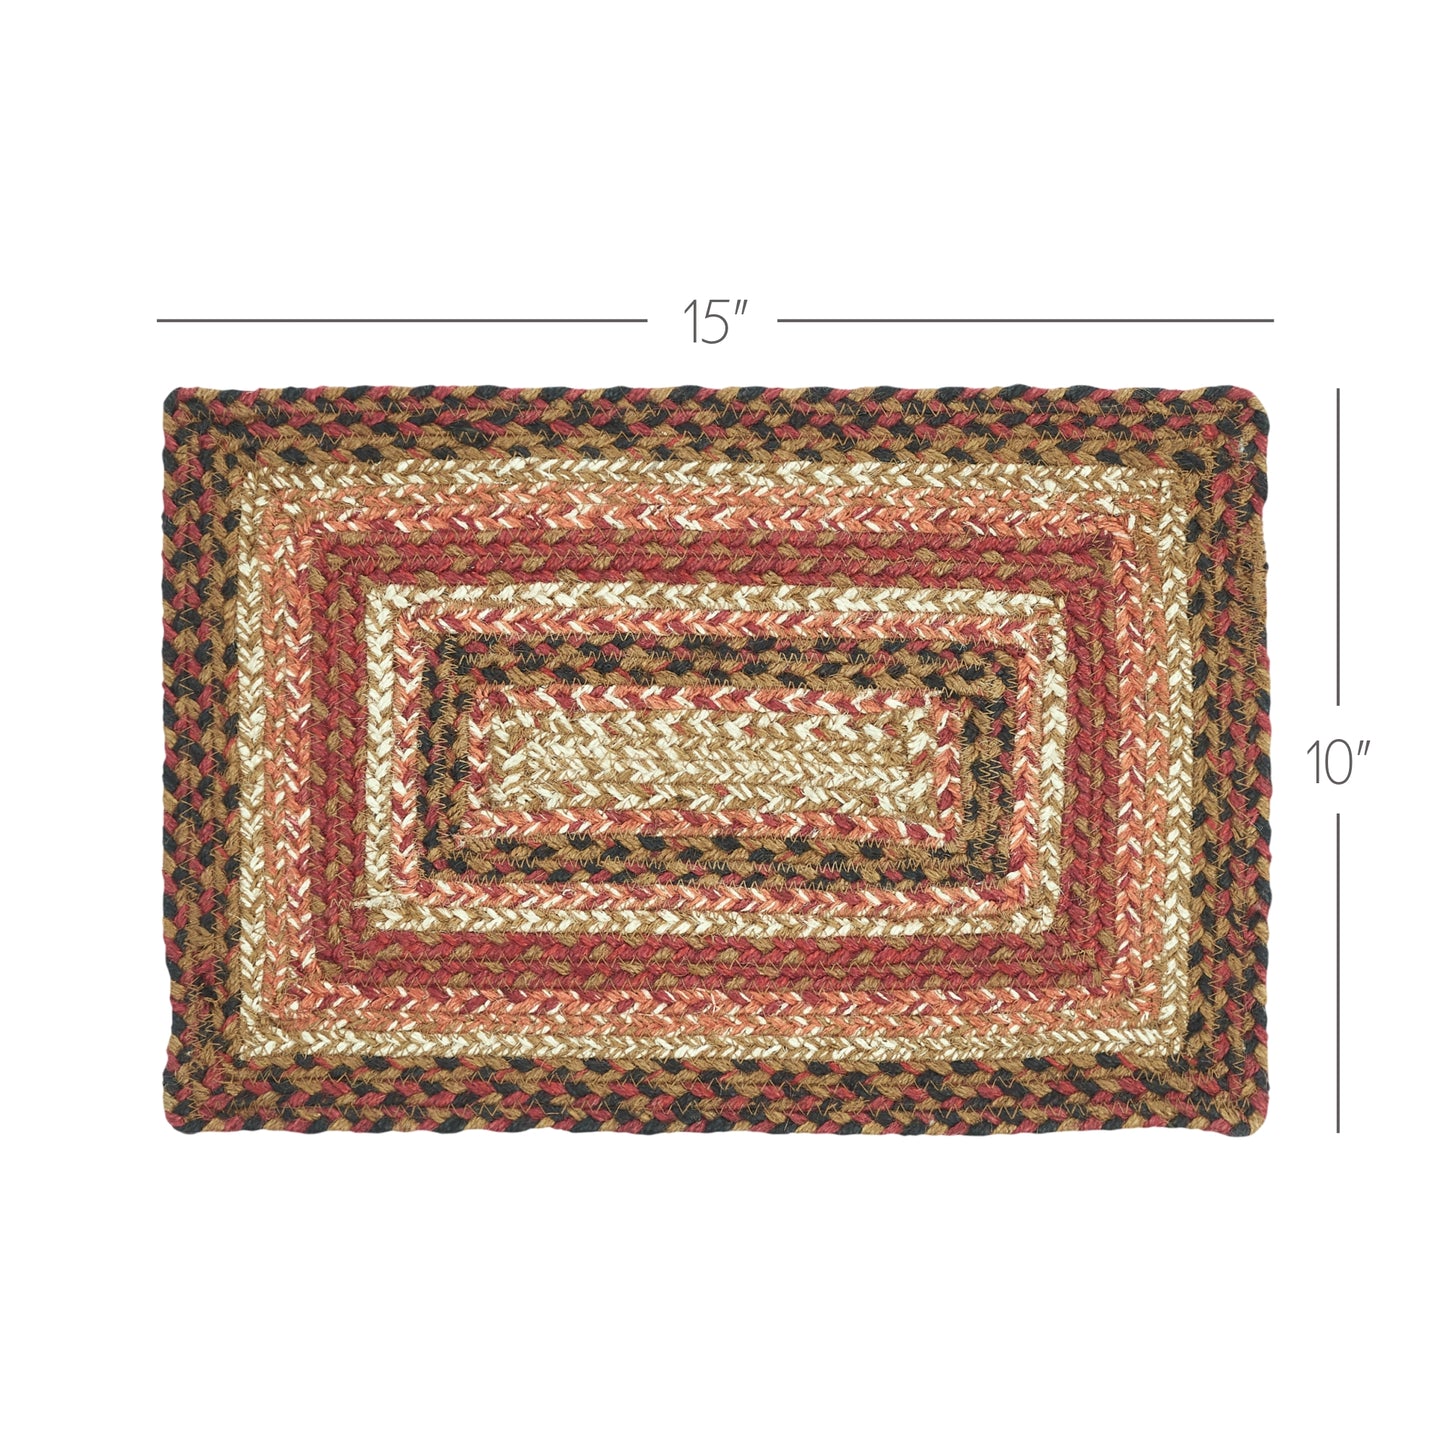 67131-Ginger-Spice-Jute-Rect-Placemat-10x15-image-1